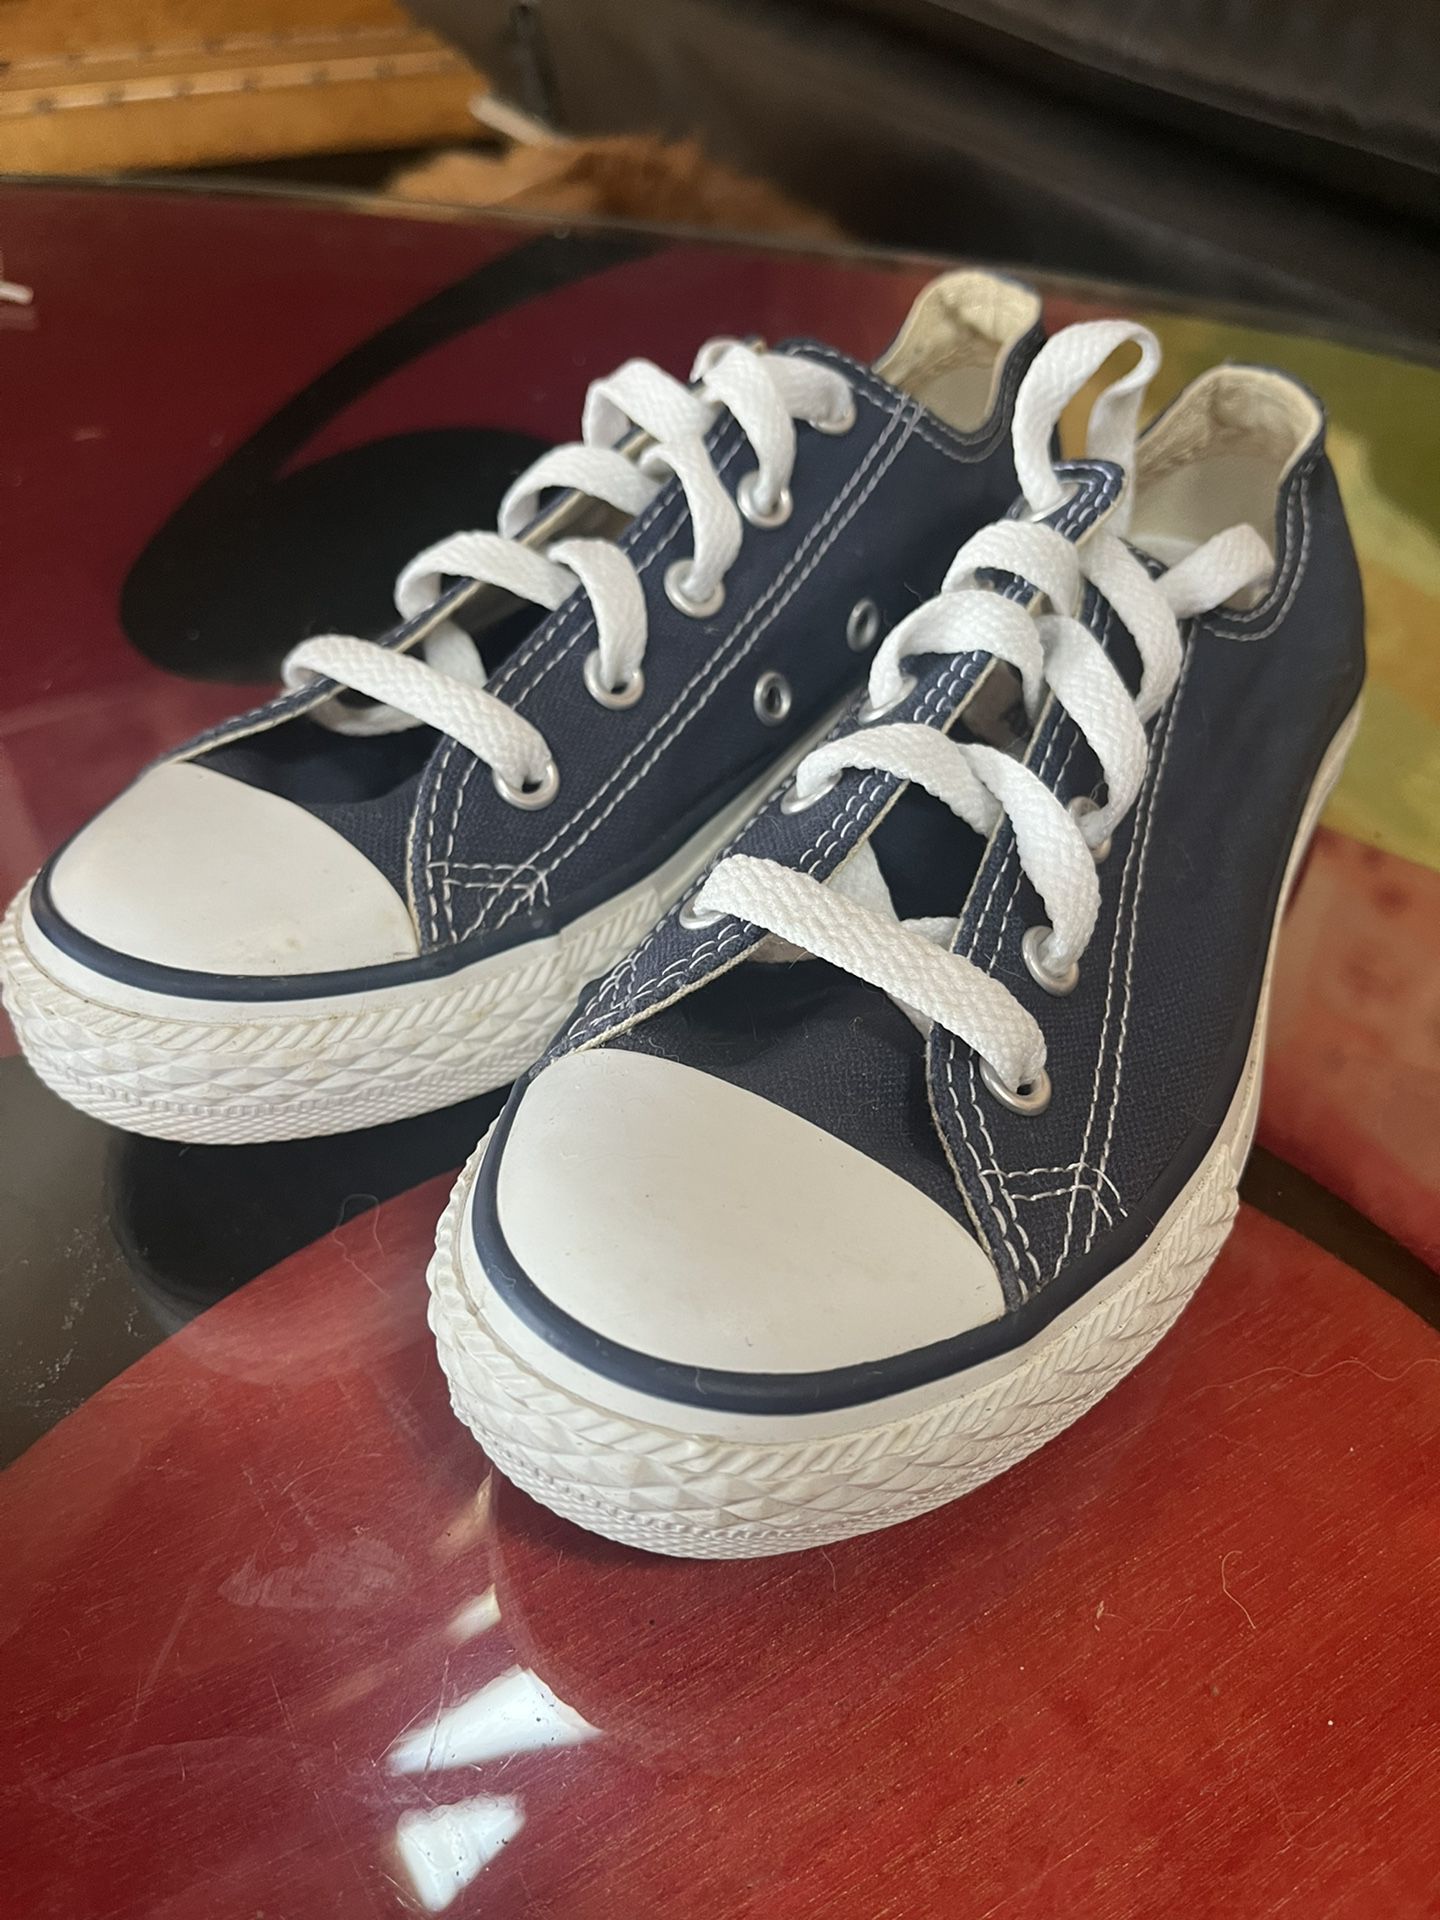 anden Tomat Karriere Blue Size 2 Kids Converse All Star (NEVER USED) for Sale in La Mesa, CA -  OfferUp